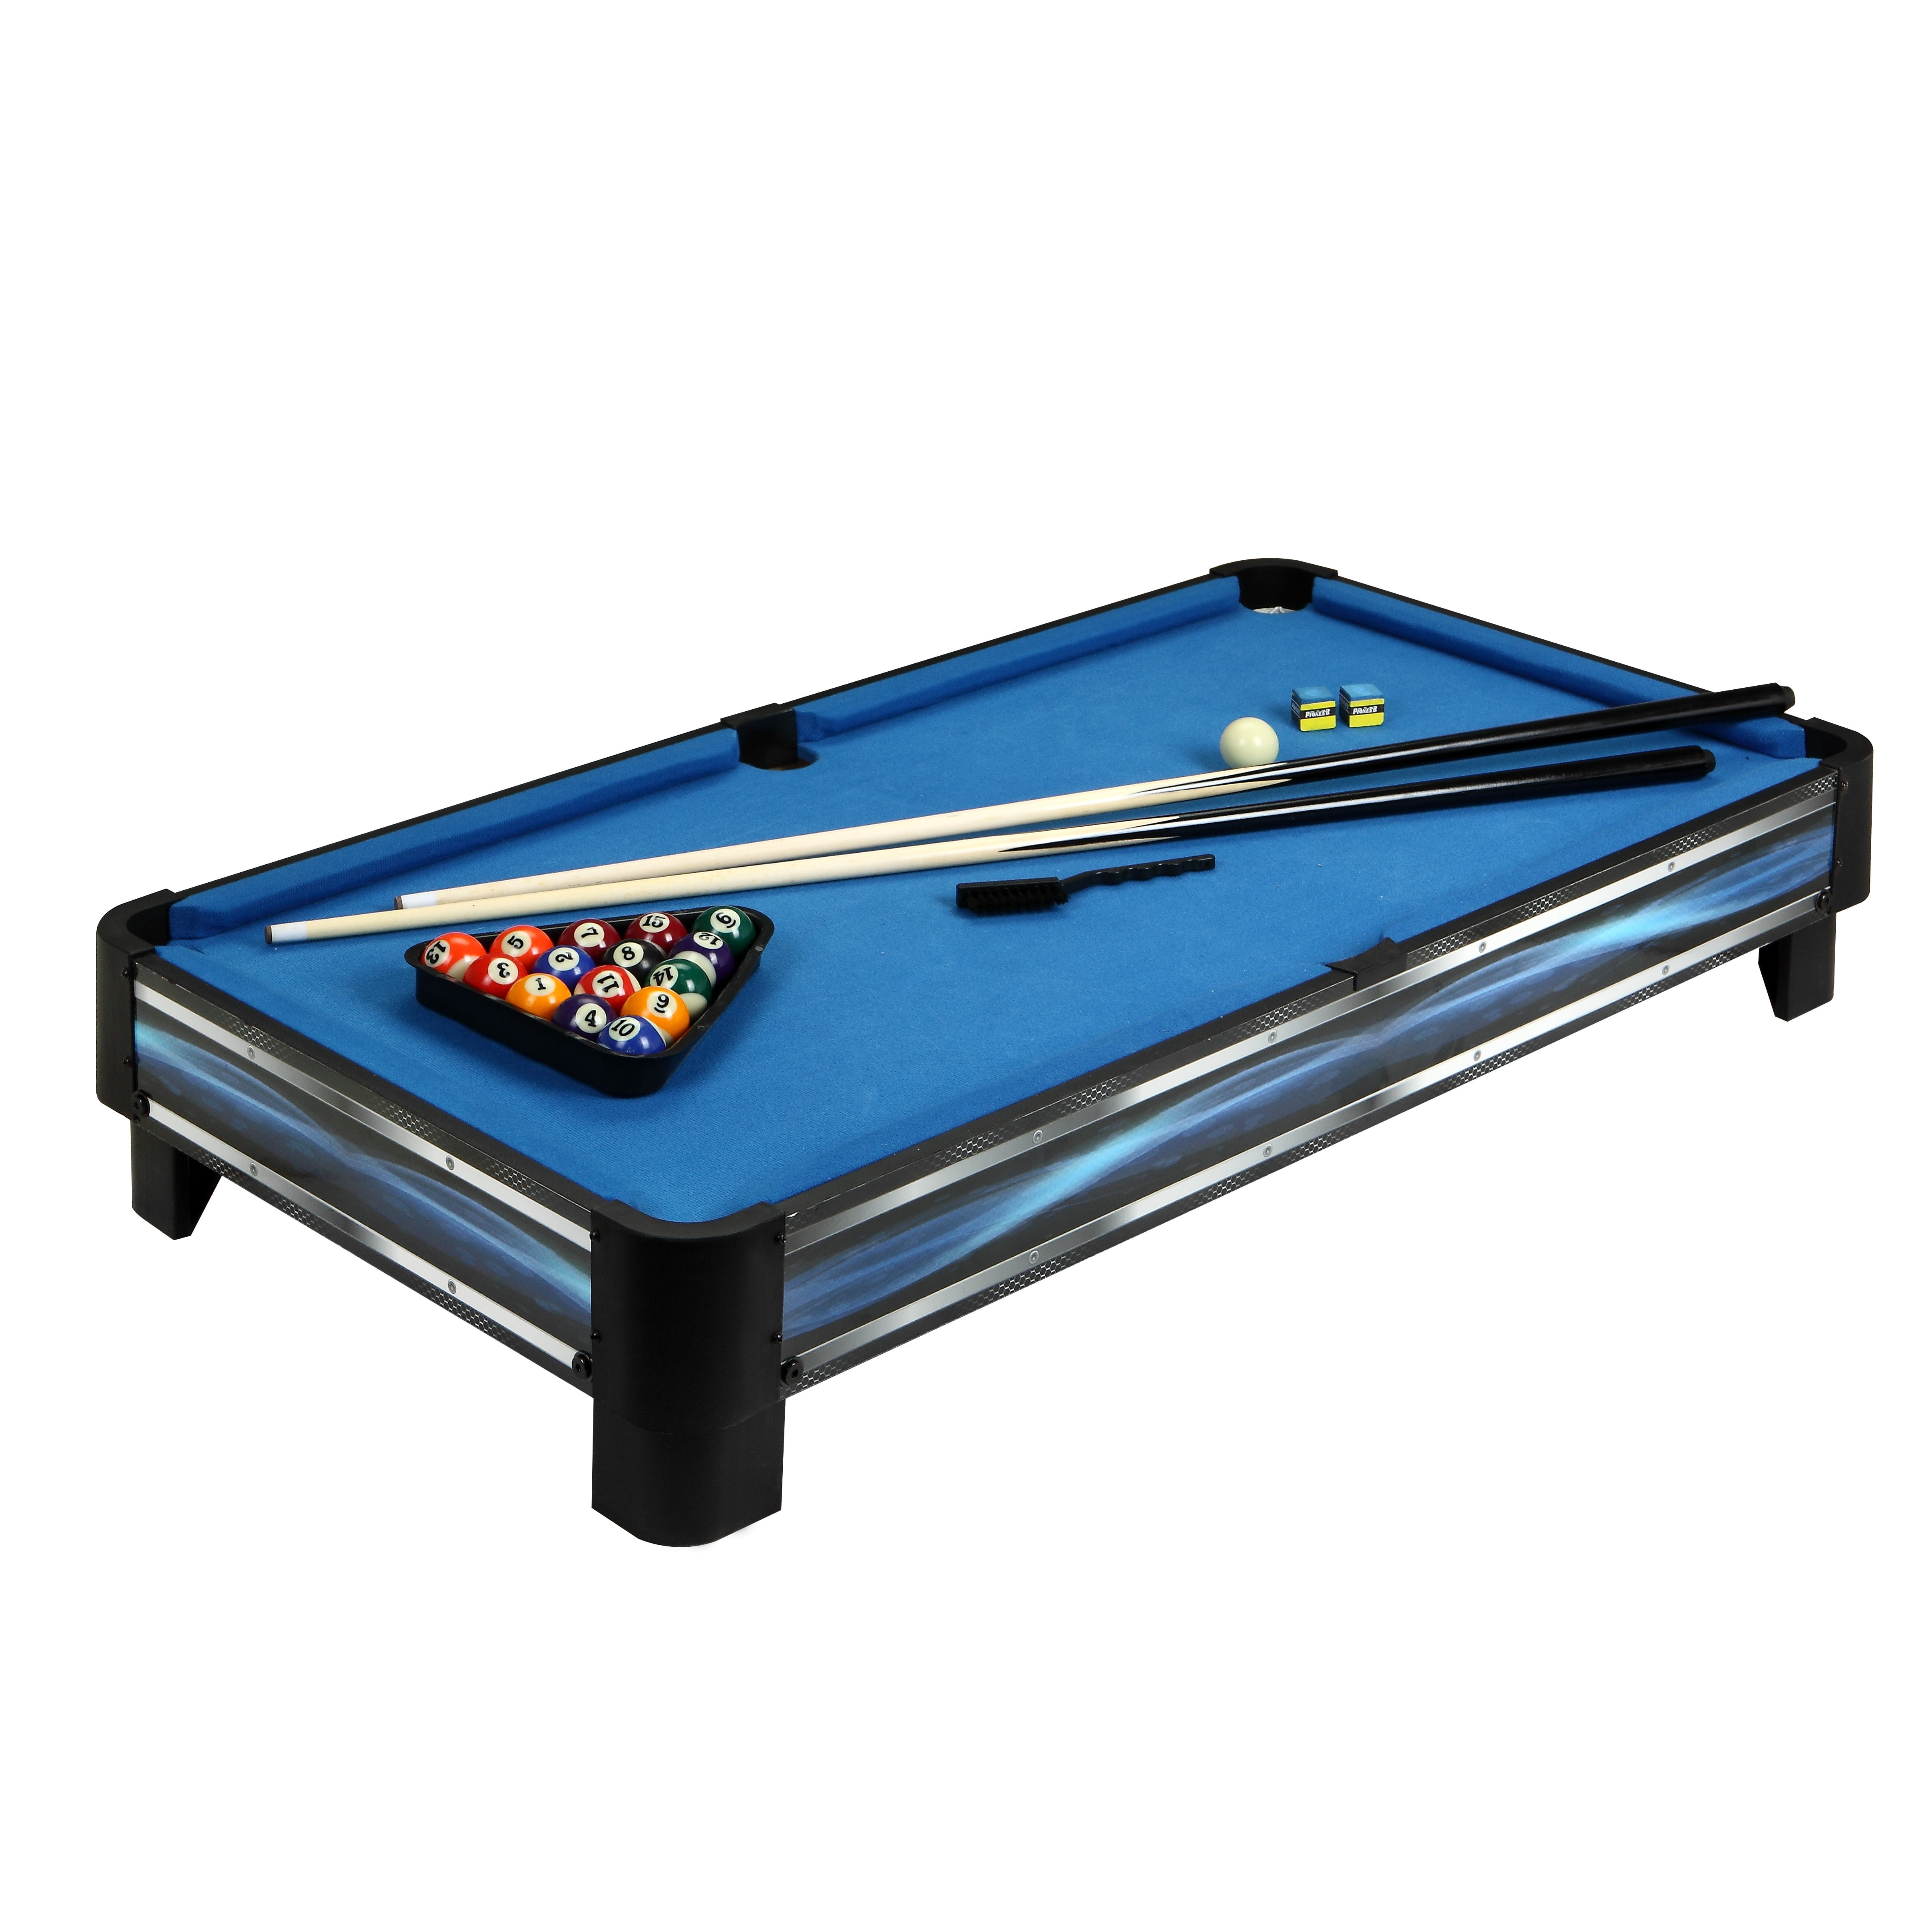 Hathaway Breakout Tabletop Pool Table, 40 In. Blue - image 2 of 7